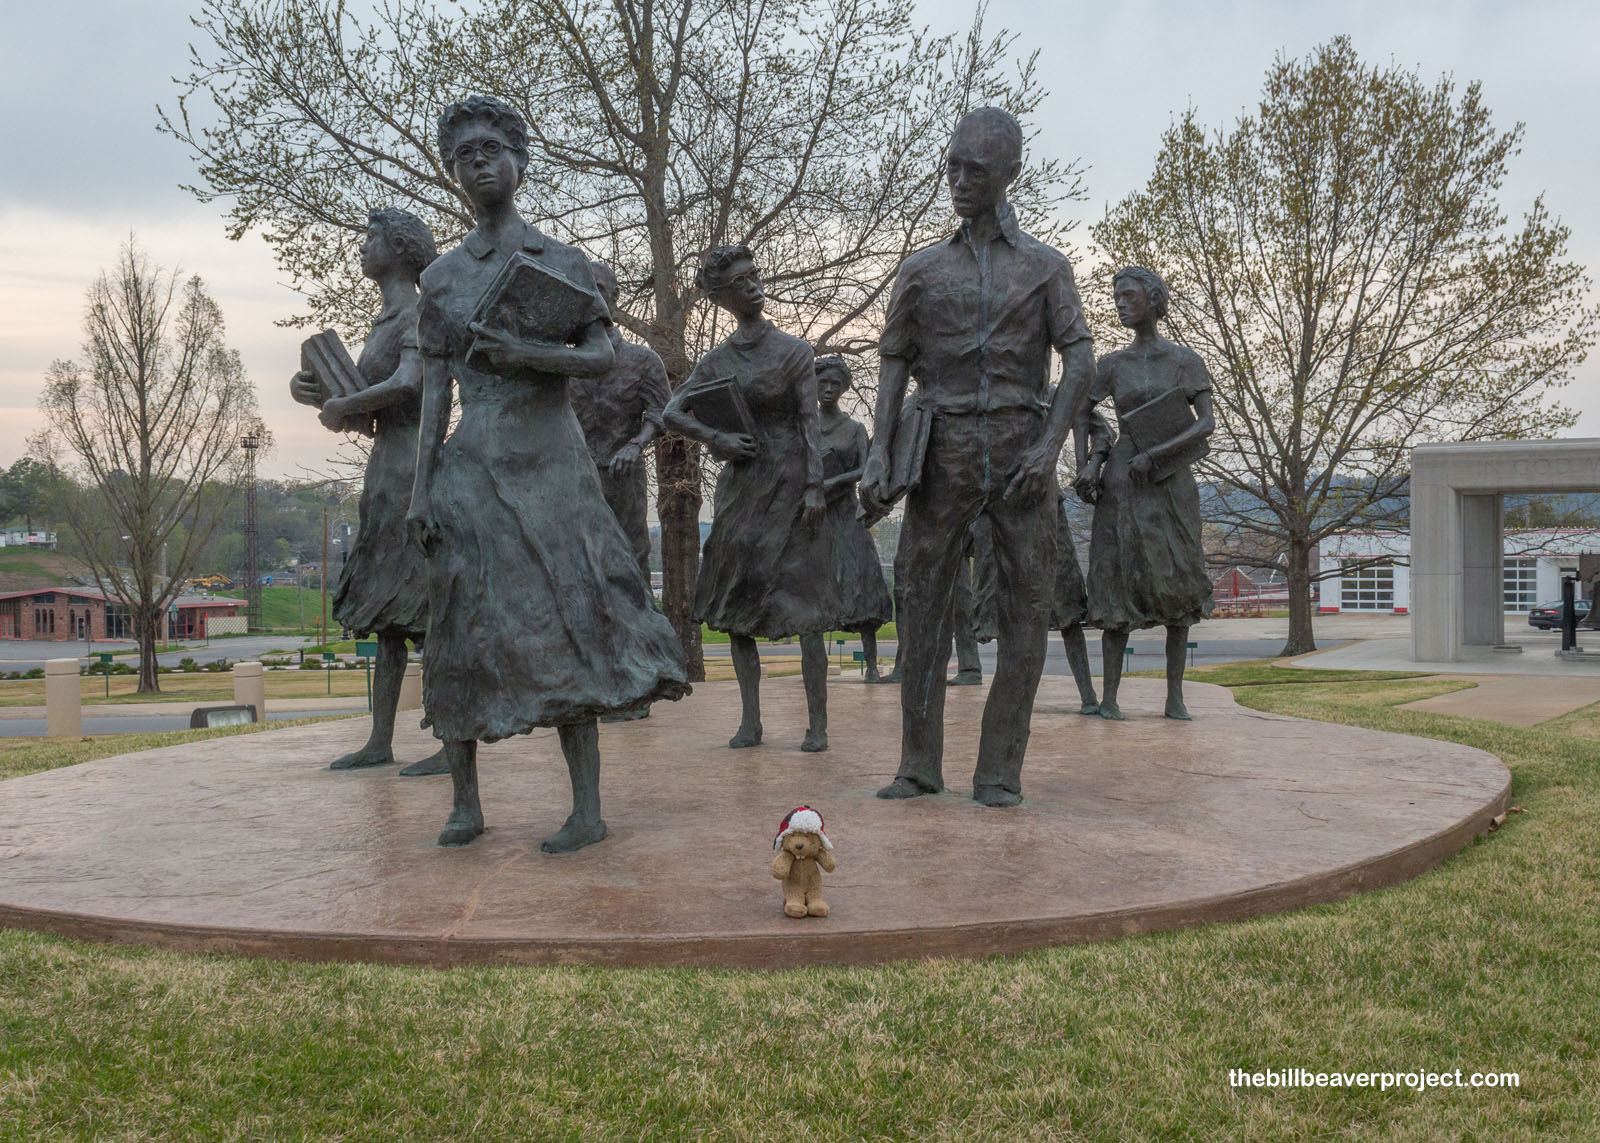 A monument to the Little Rock Nine!